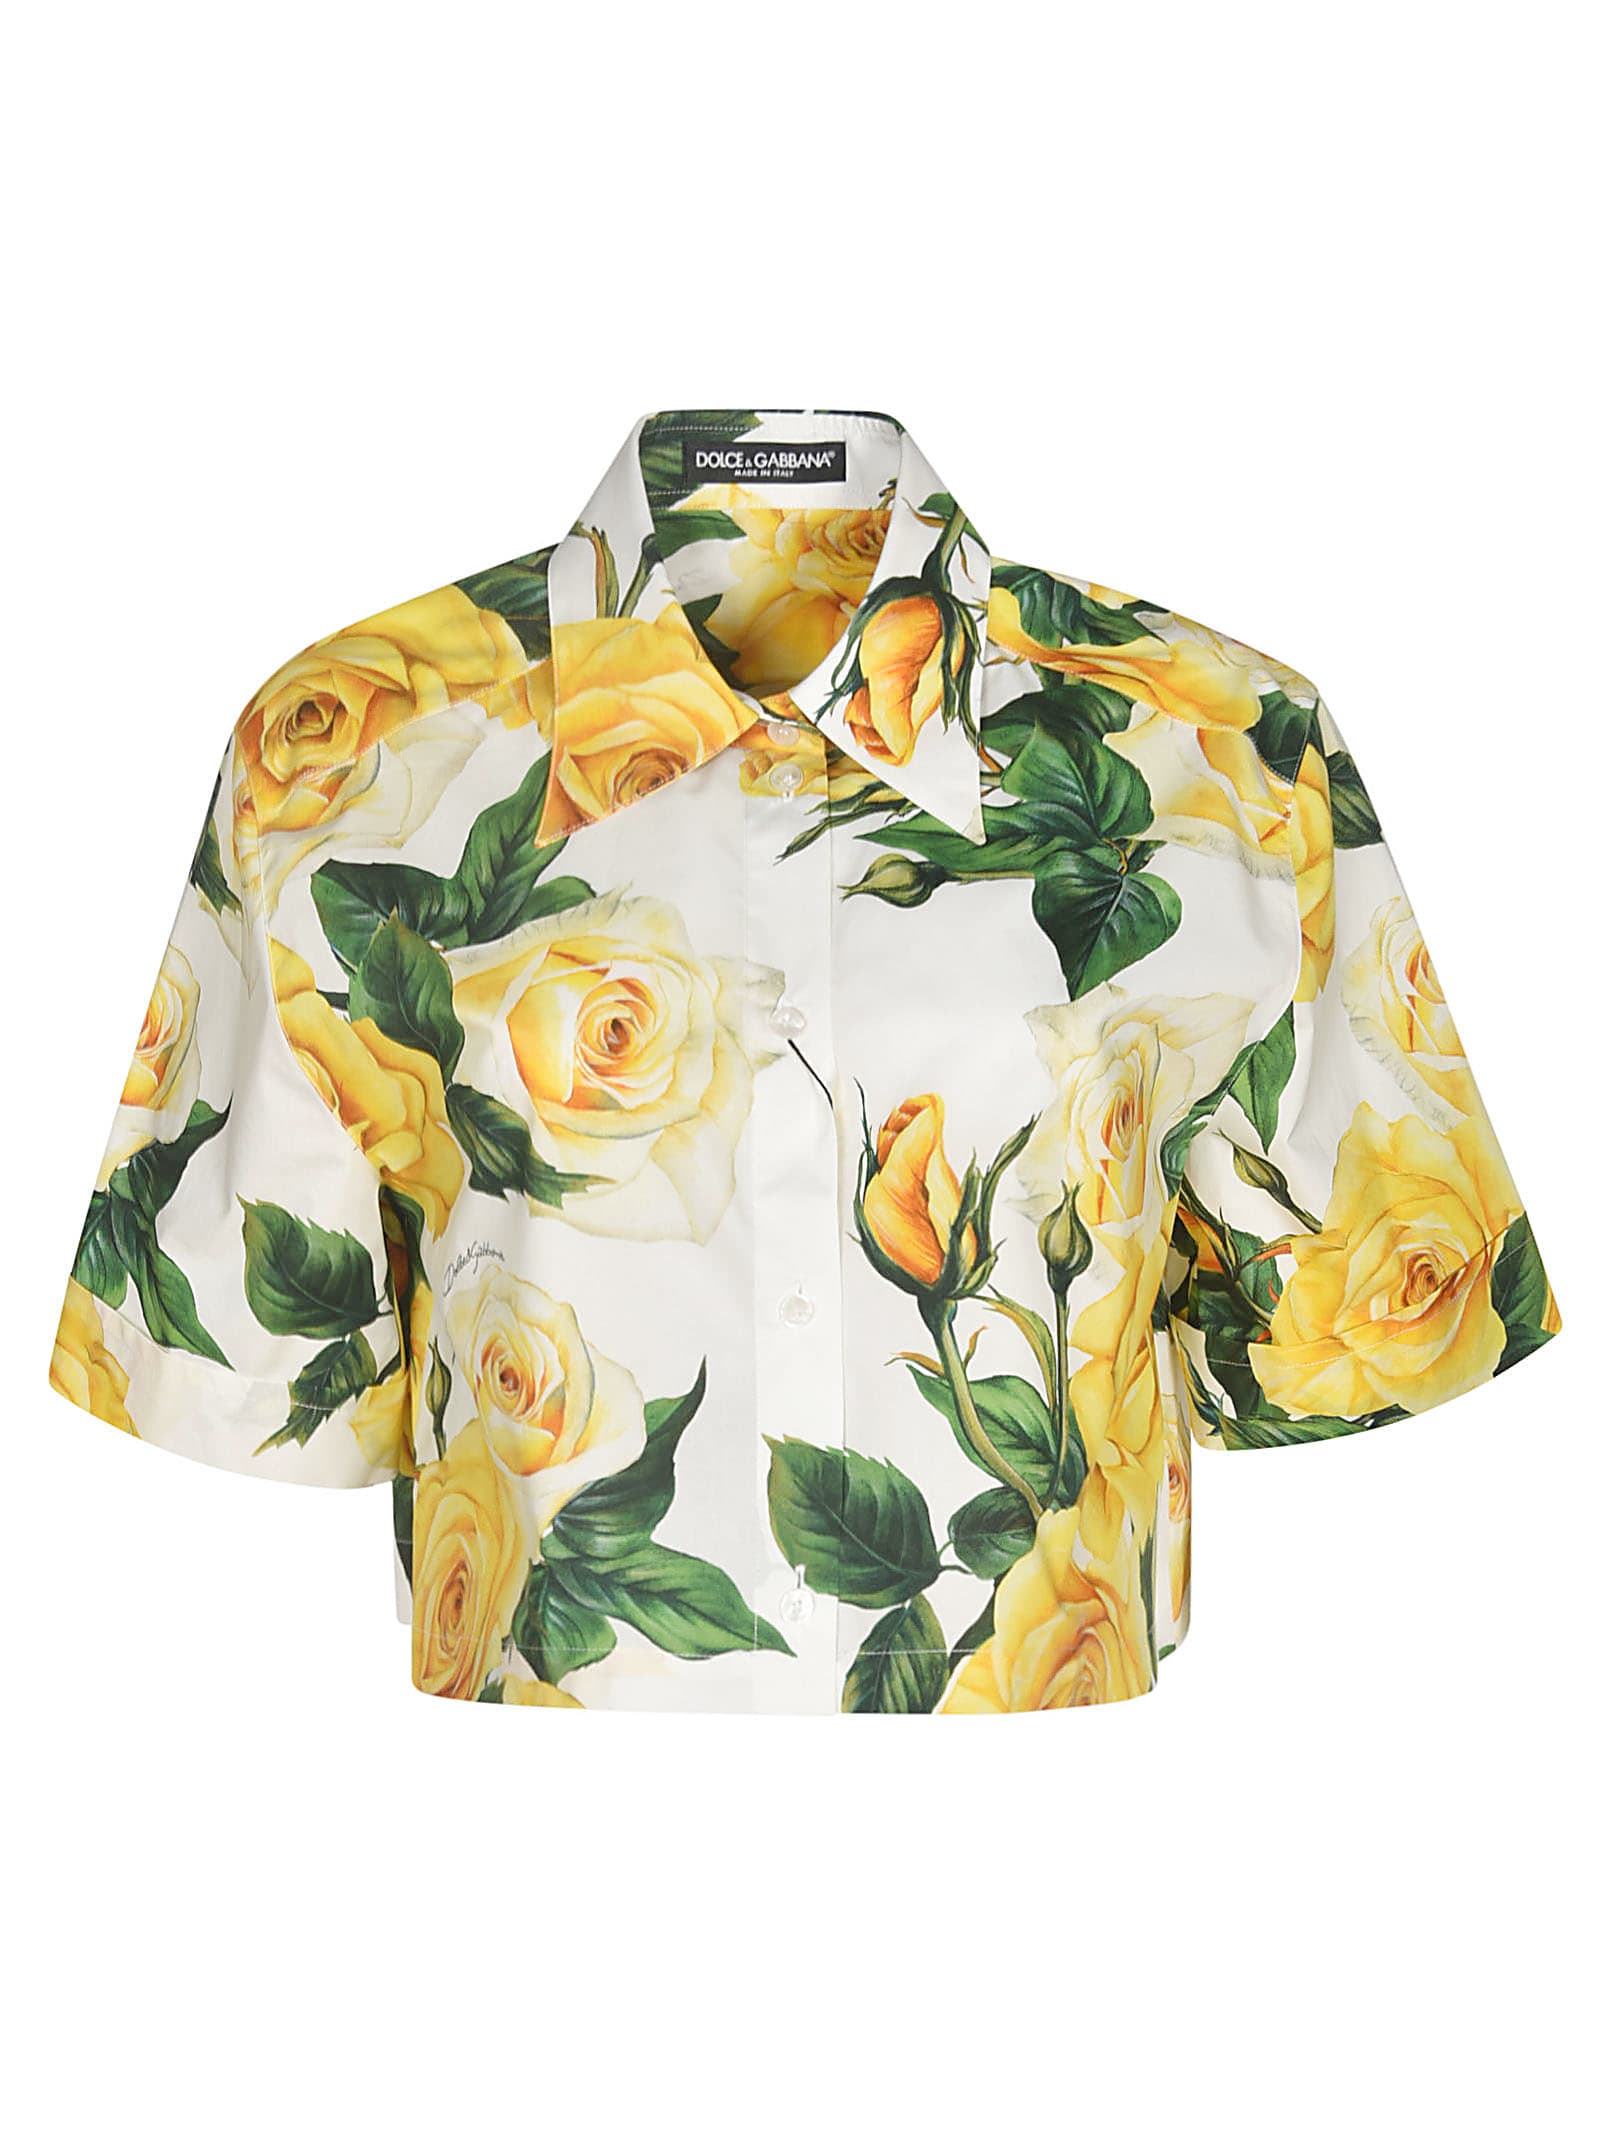 Dolce & Gabbana Floral Cropped Shirt In Multicolor